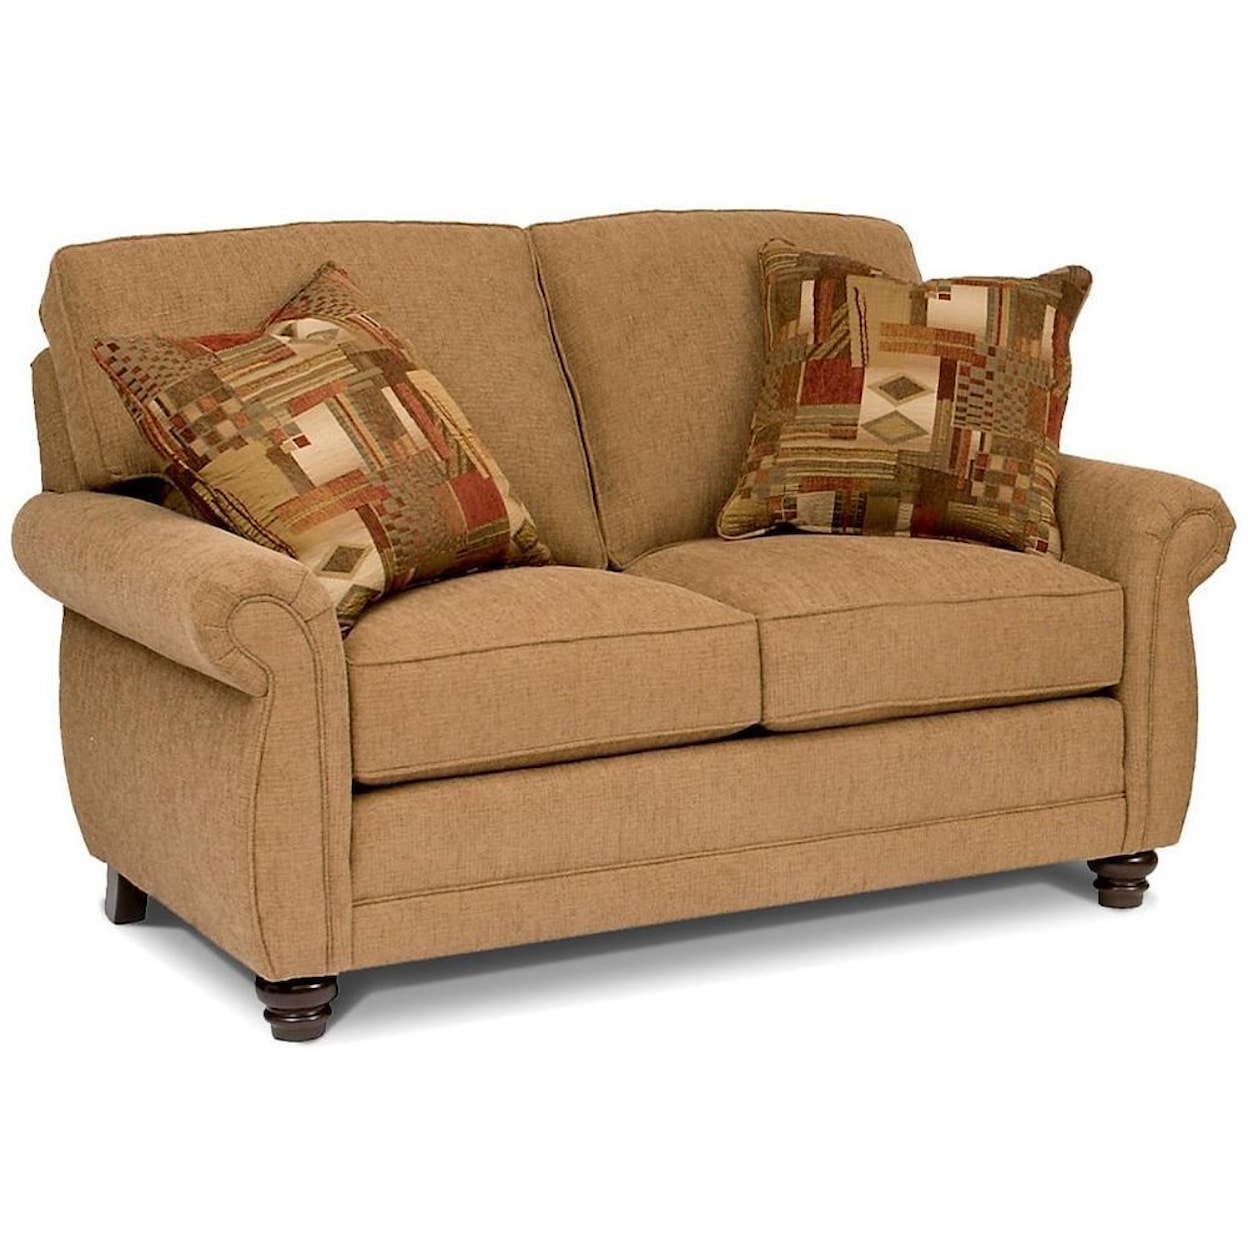 Smith Brothers 302 Loveseat